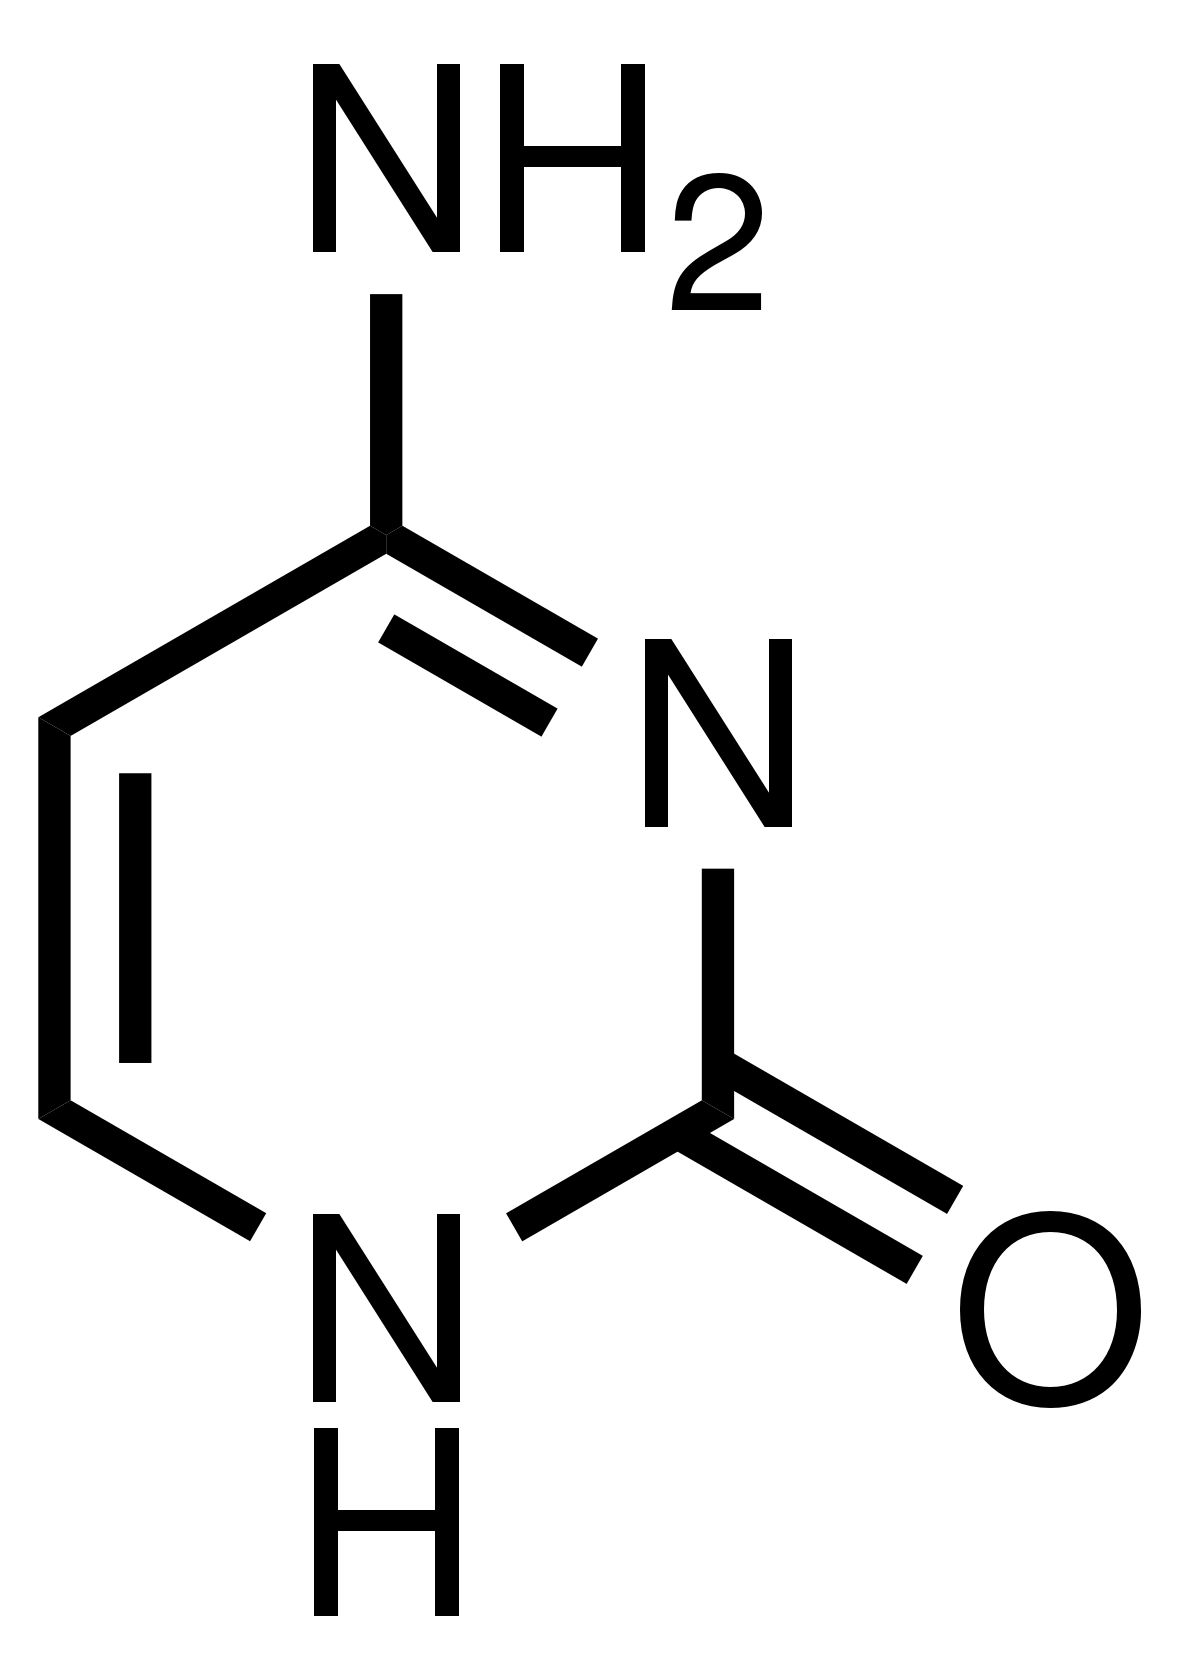 This image depicts the chemical structure of cytosine